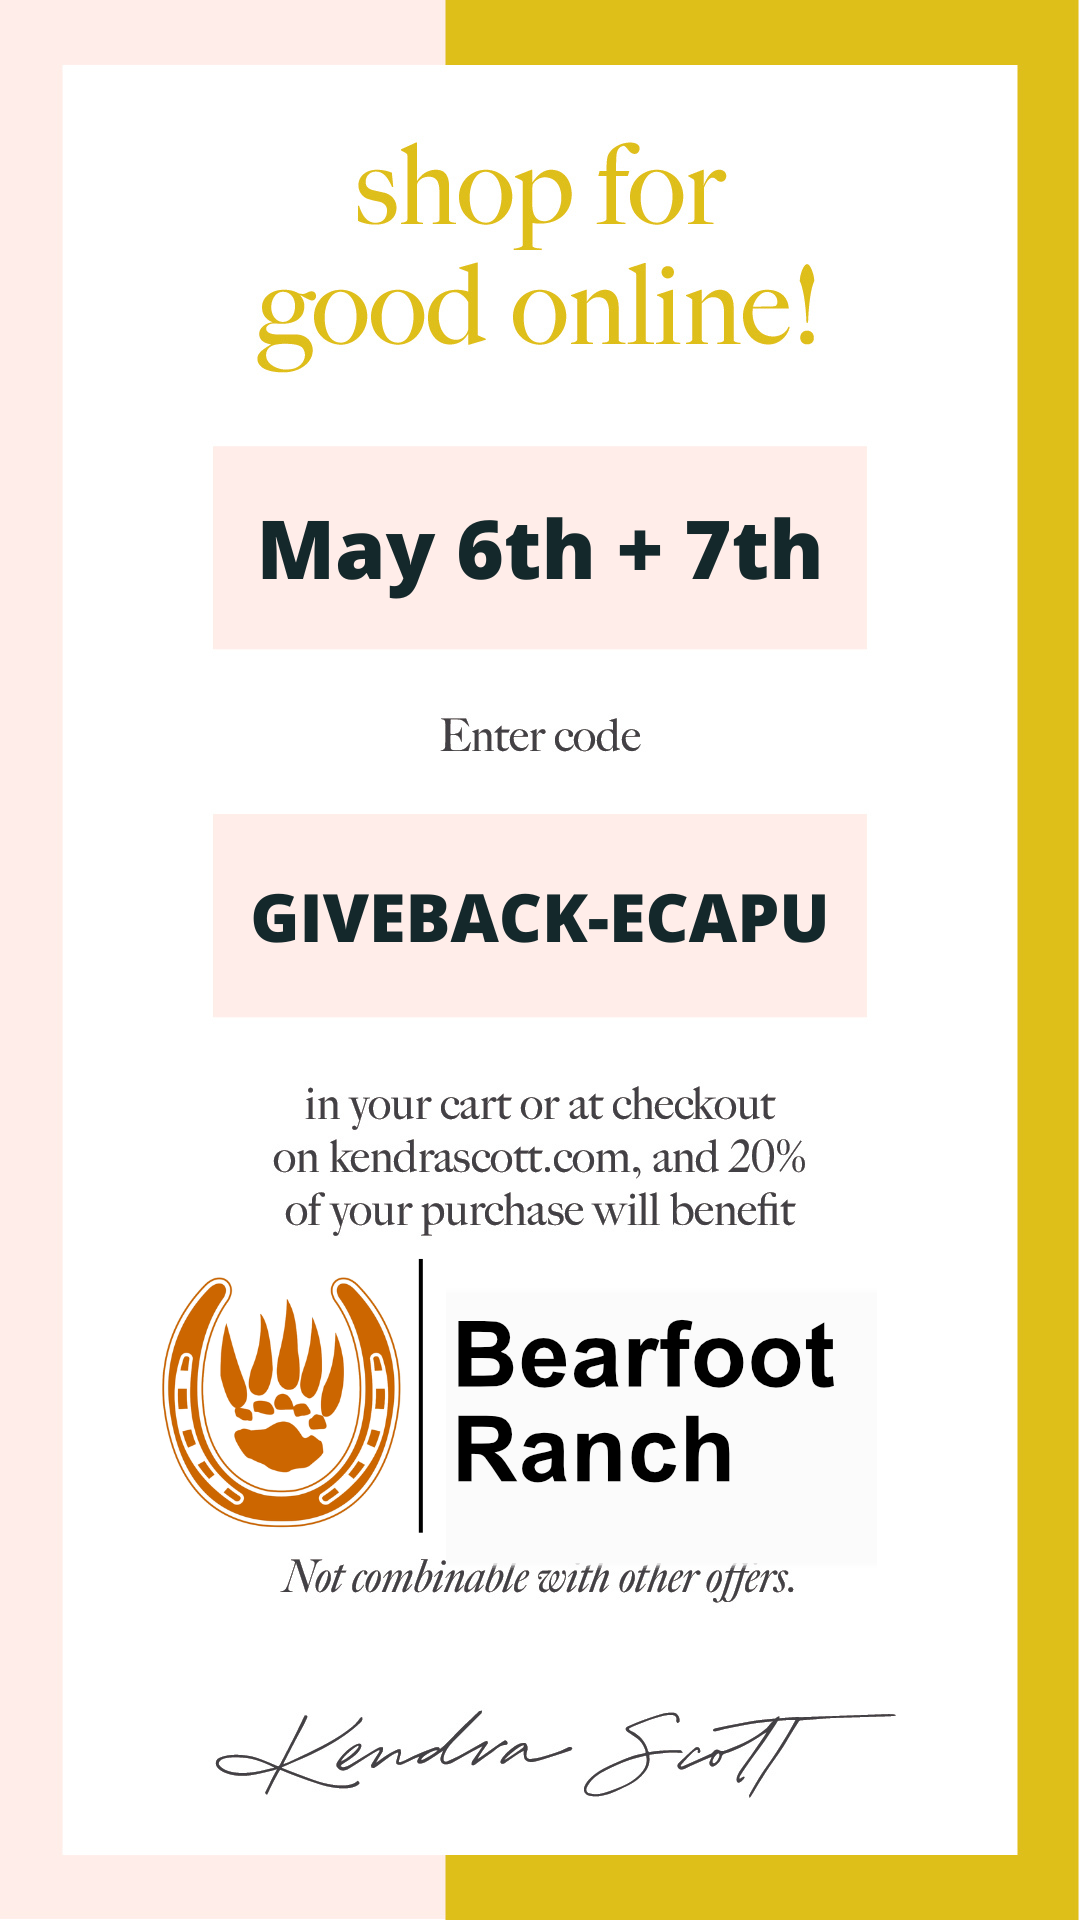 Kendra Scott will make a 20% donation to Bearfoot Ranch if you use the code GIVEBACK-ECAPU